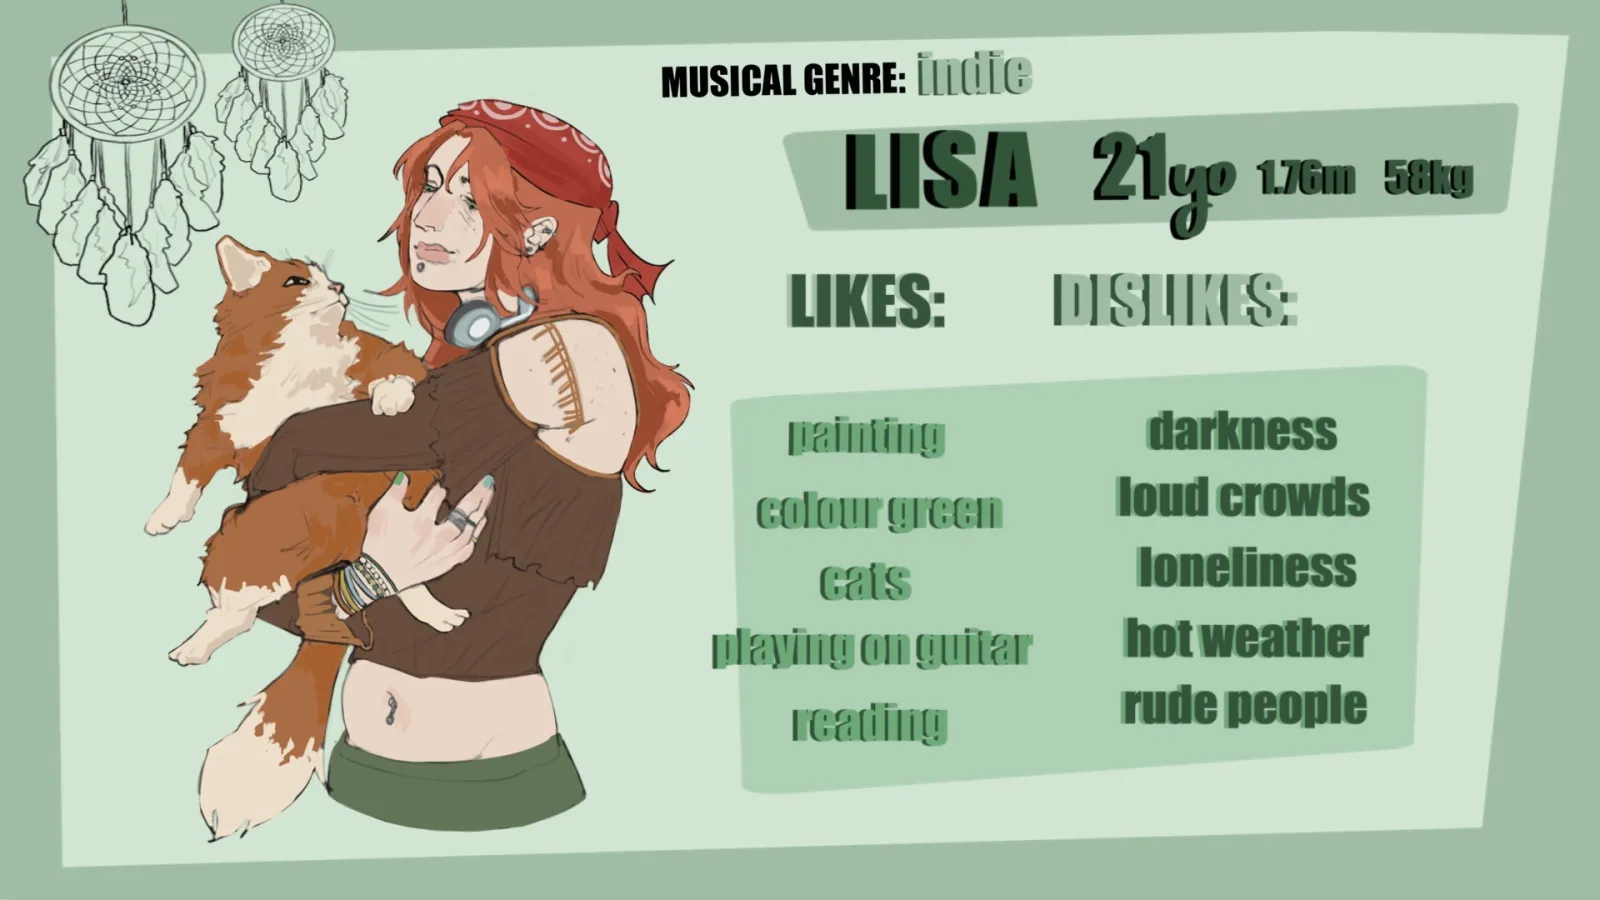 Final project shows the character Lisa, and describes her likes and dislikes